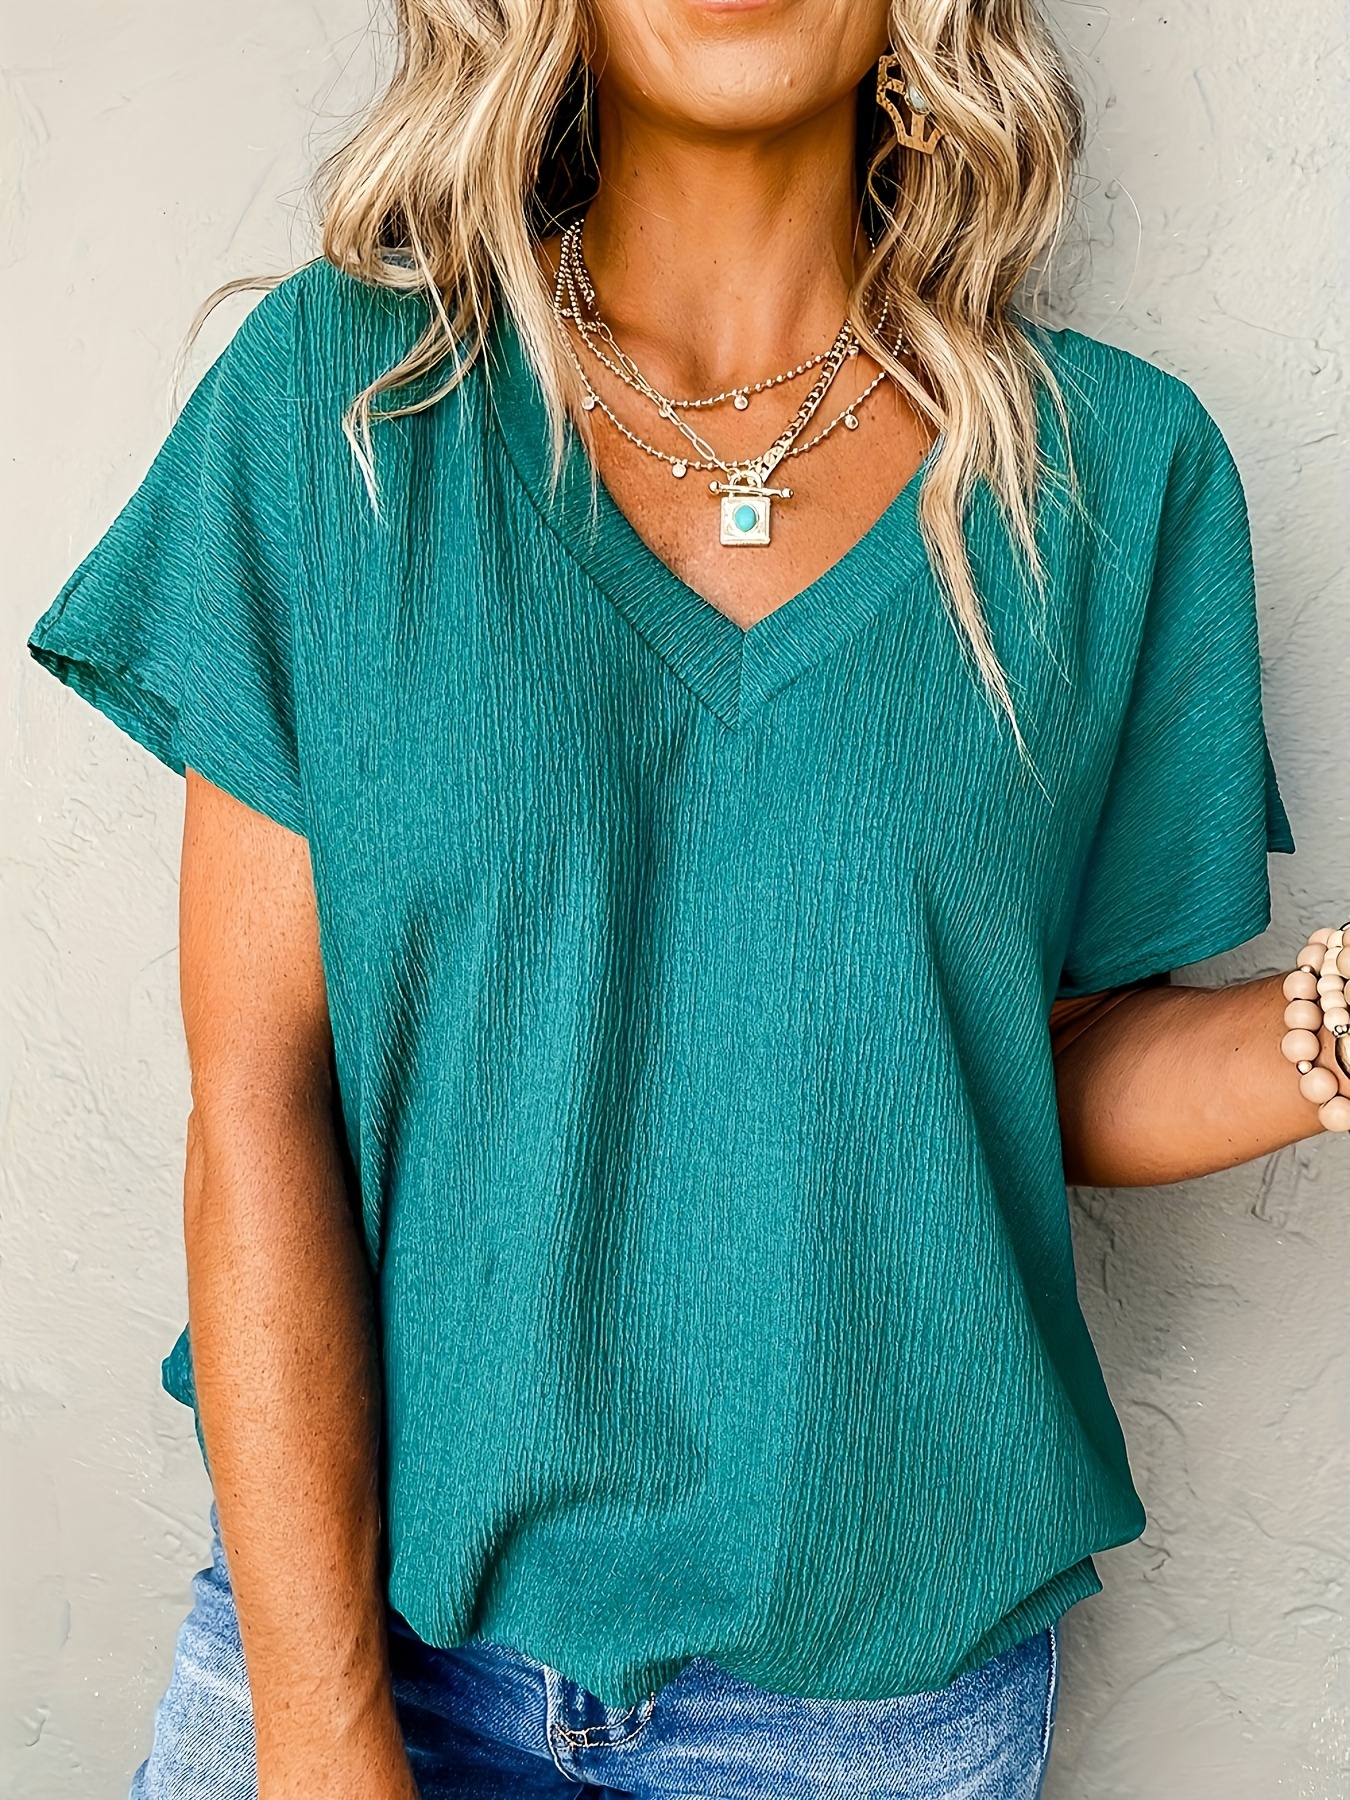 Green Tops for Women summer tops for women Fashion Women's Summer V-Neck  Solid Short Sleeve Sexy Top Blouse Work Blouse ,Mint Green,S